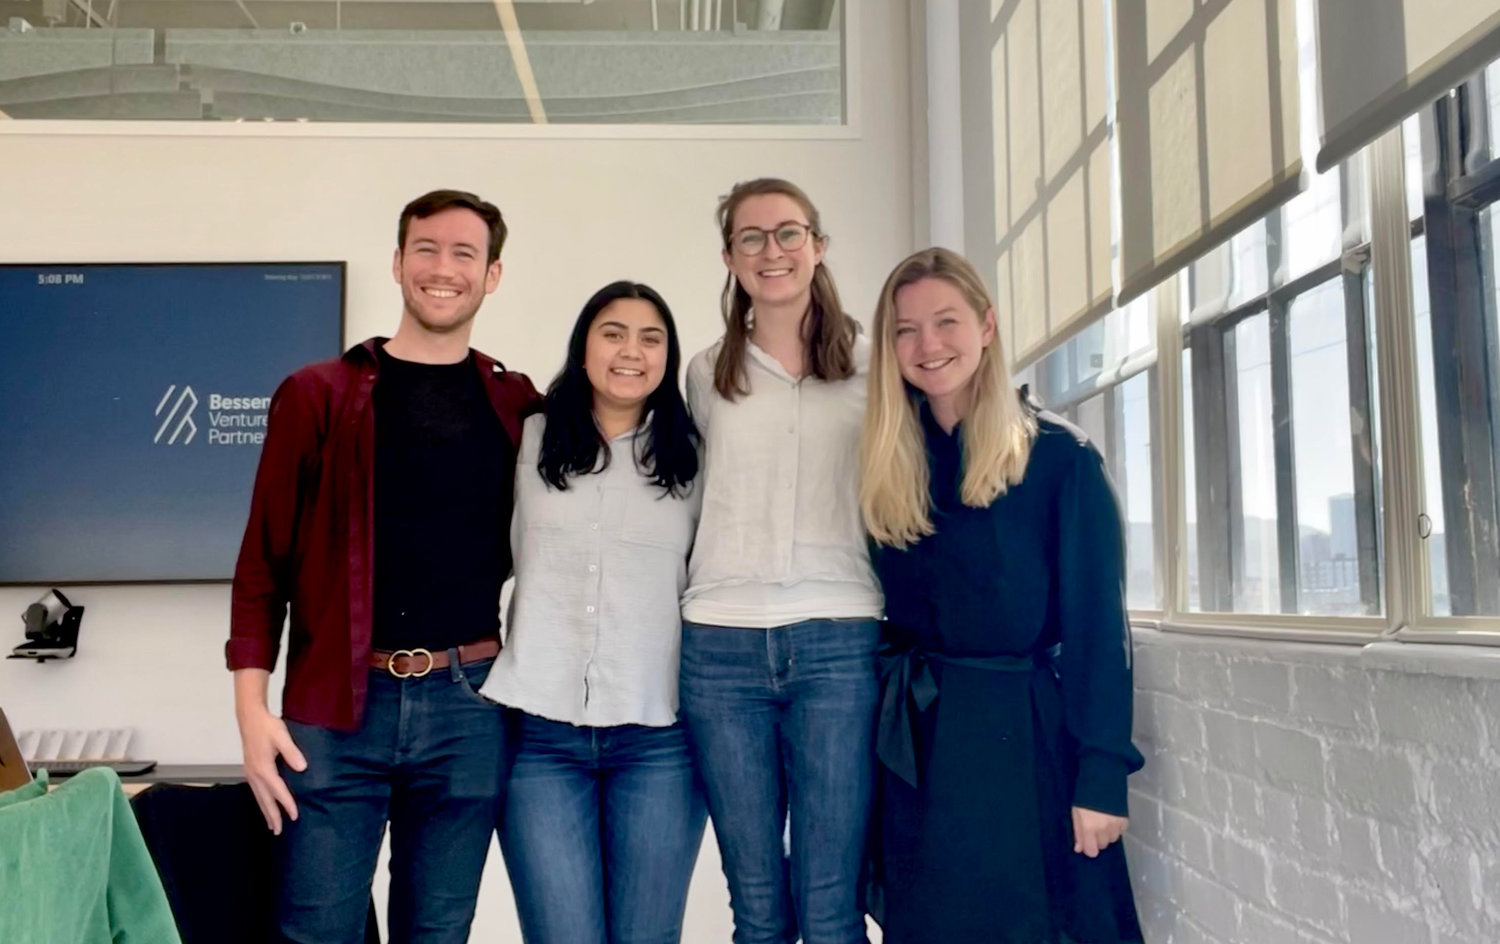 The team at Formally. from left: Noah Picard, Briana Das, Emma Catlin, and Amelie Sophie Vavrovsky, the firm's founder